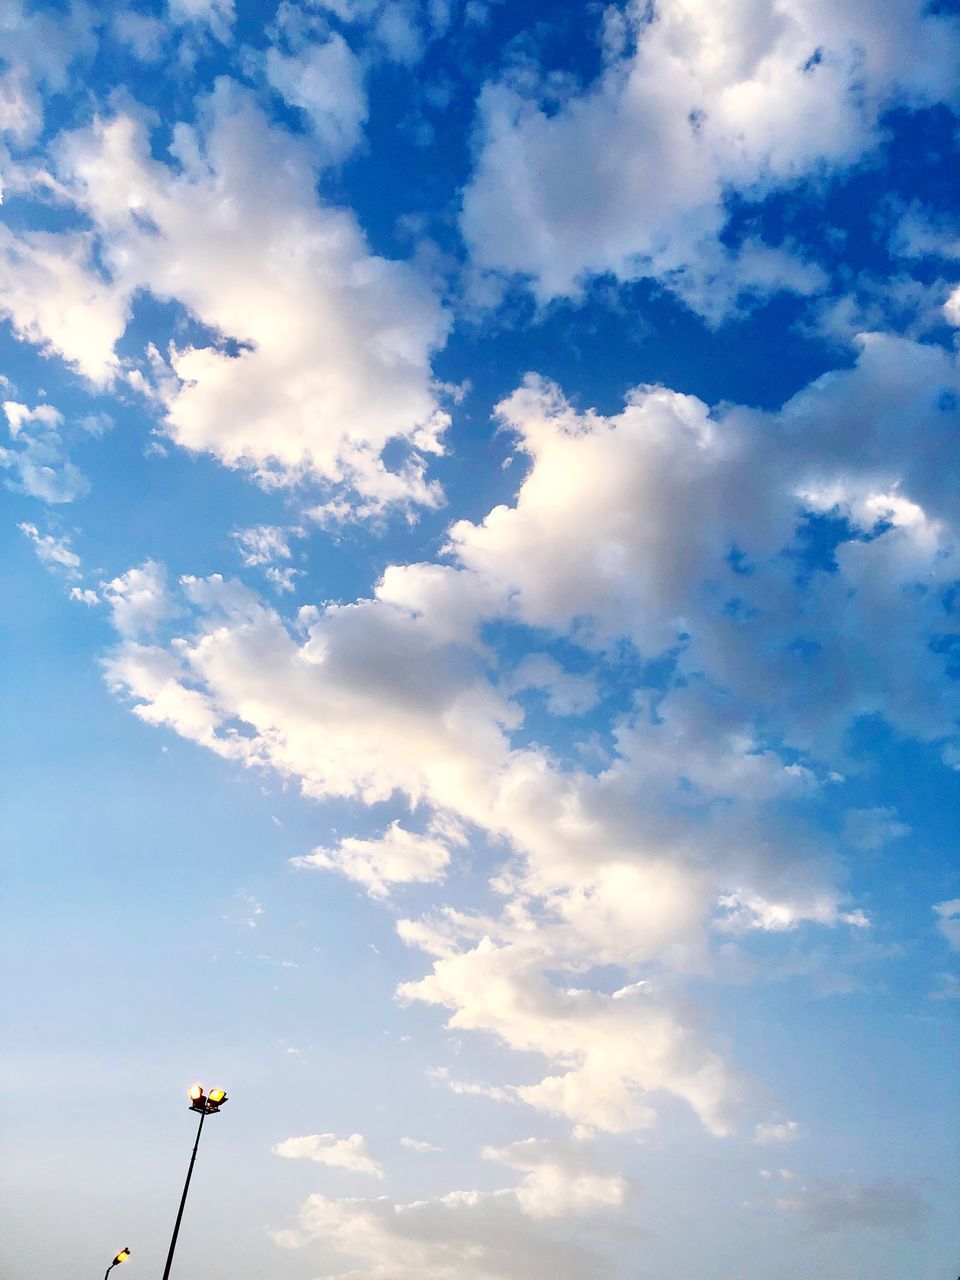 cloud - sky, sky, low angle view, lighting equipment, beauty in nature, street light, nature, no people, street, day, scenics - nature, tranquility, blue, outdoors, technology, tranquil scene, sunlight, light, idyllic, floodlight